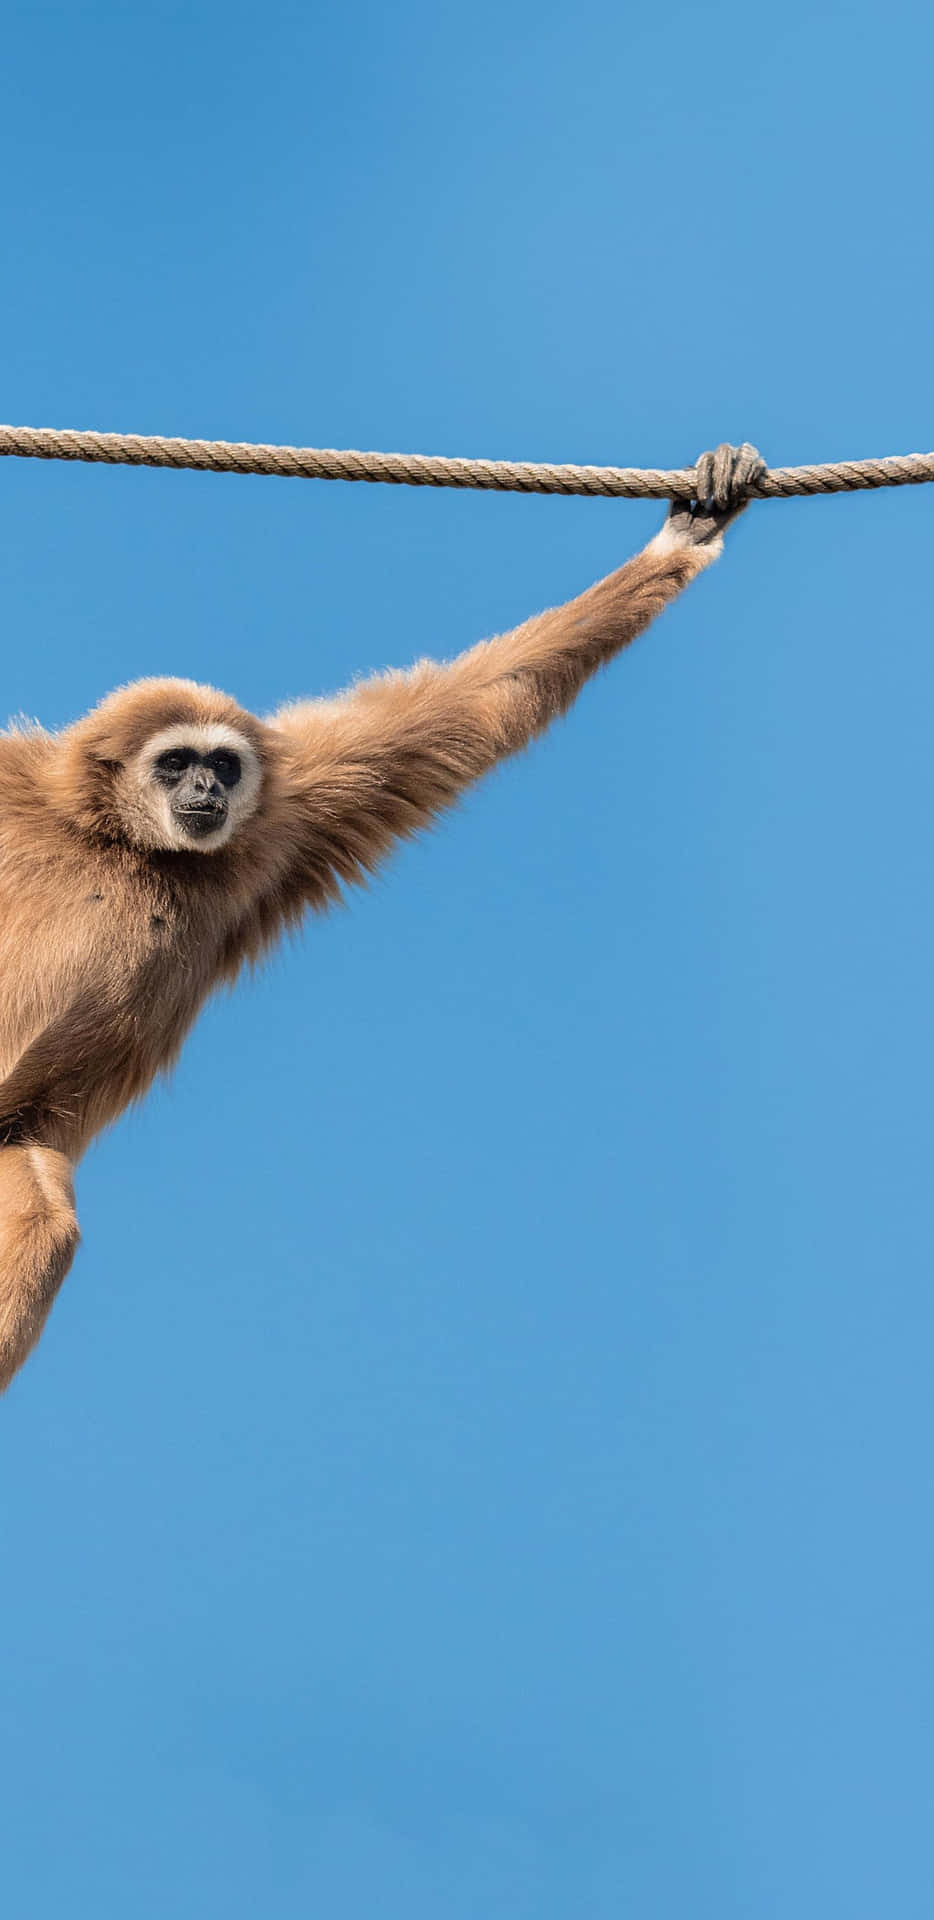 Enjoy the exceptional display of the new Pixel 3XL Gibbon